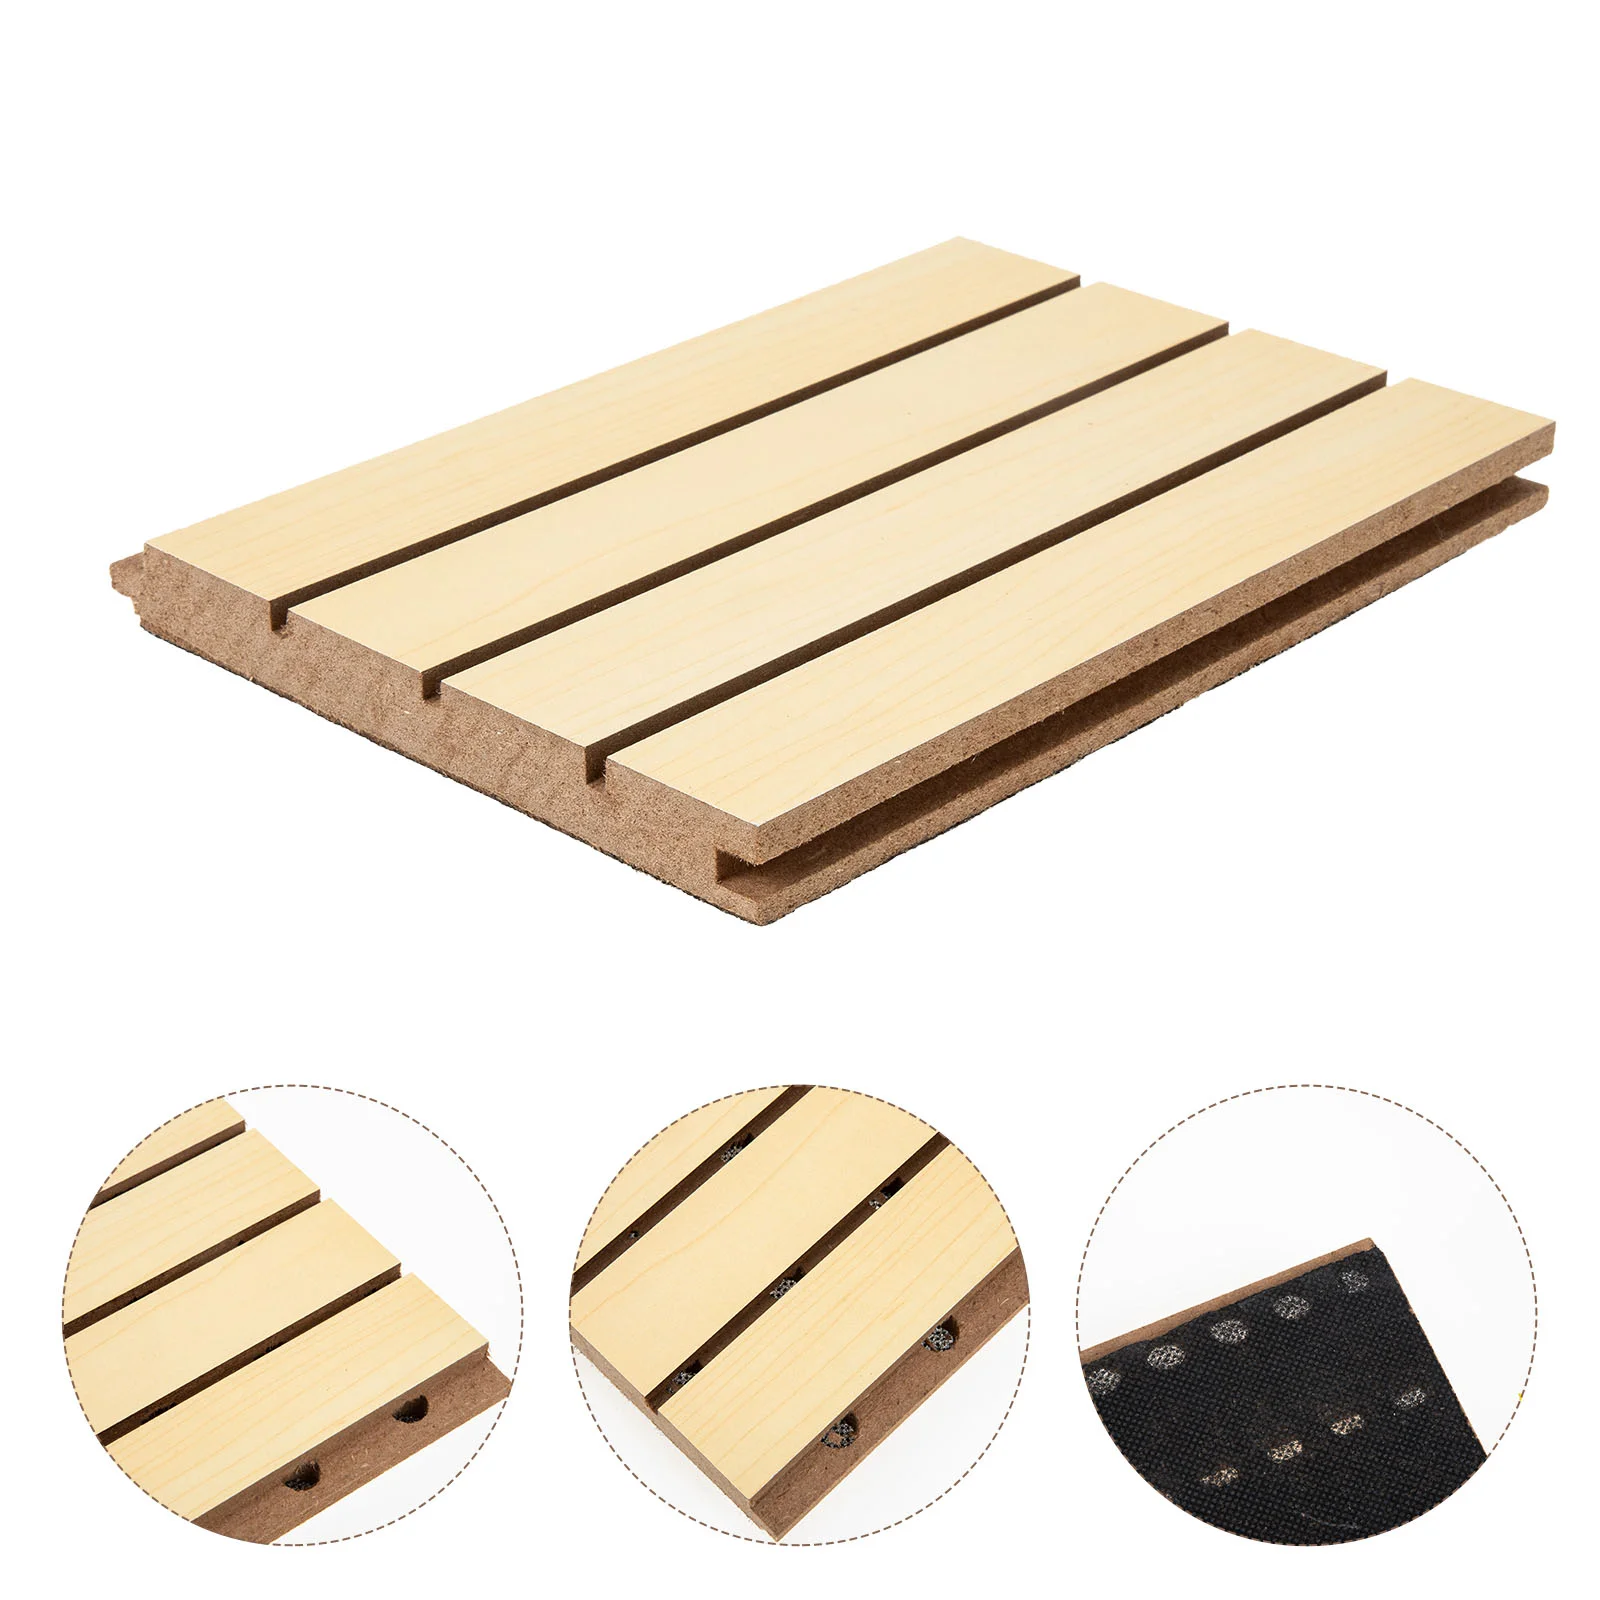 

Sound Panel Acoustic Panels Wall Studio Proof Wooden Absorption Material Insulation Soundproofing Padding Dampening Board